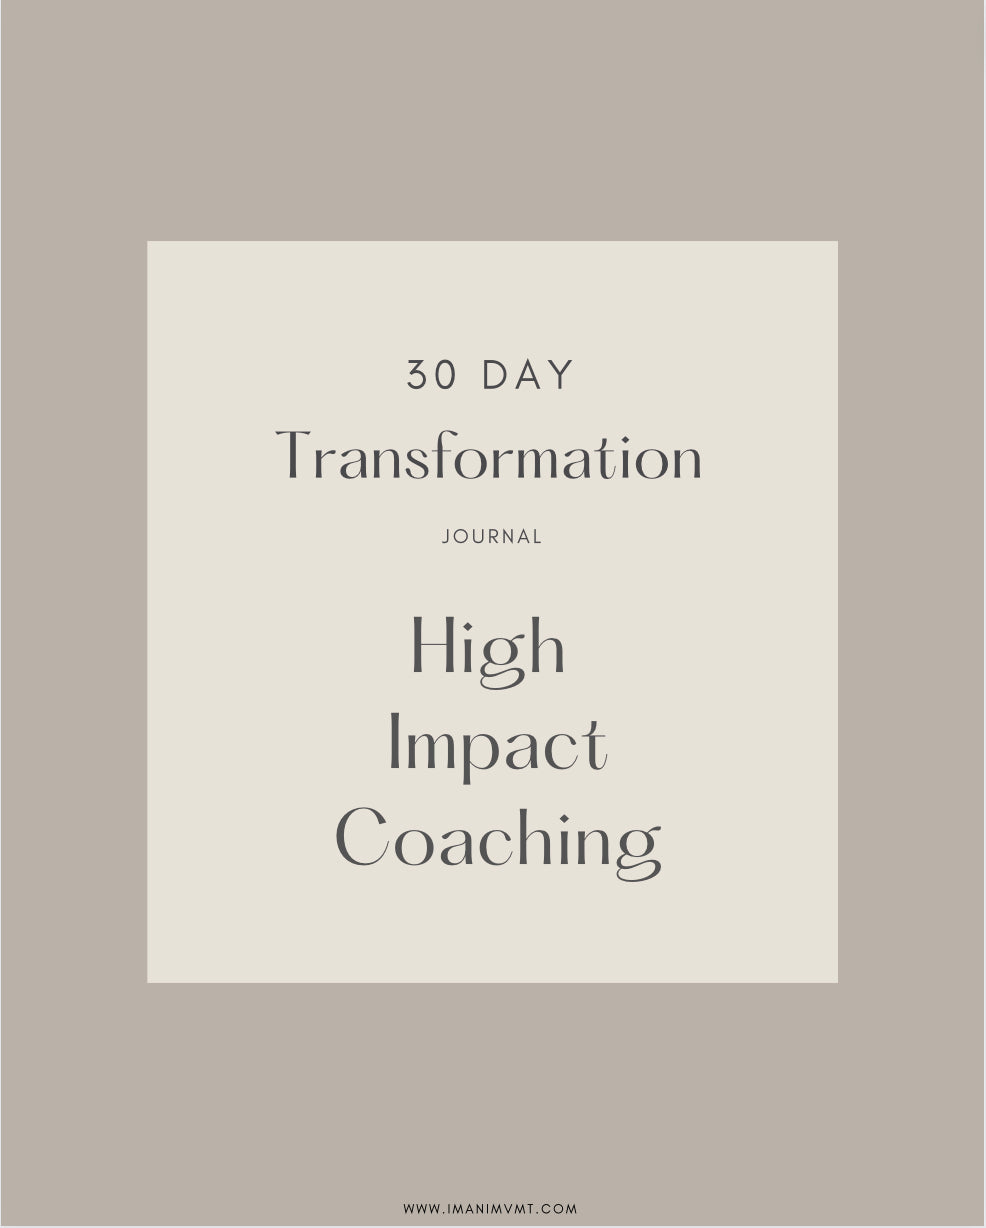 The 30 Day Business Transformation Journal